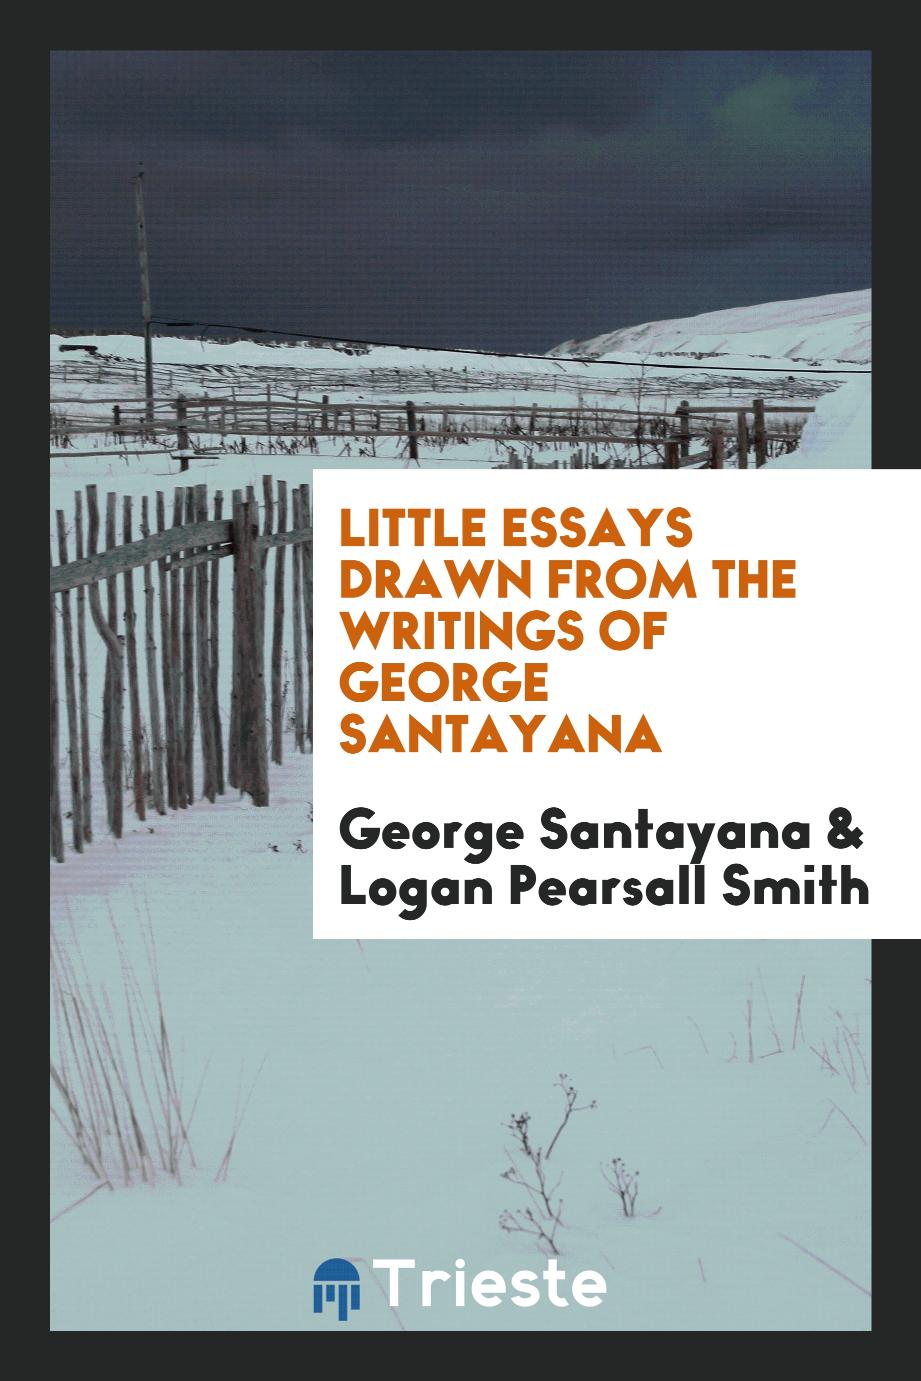 Little Essays Drawn from the Writings of George Santayana